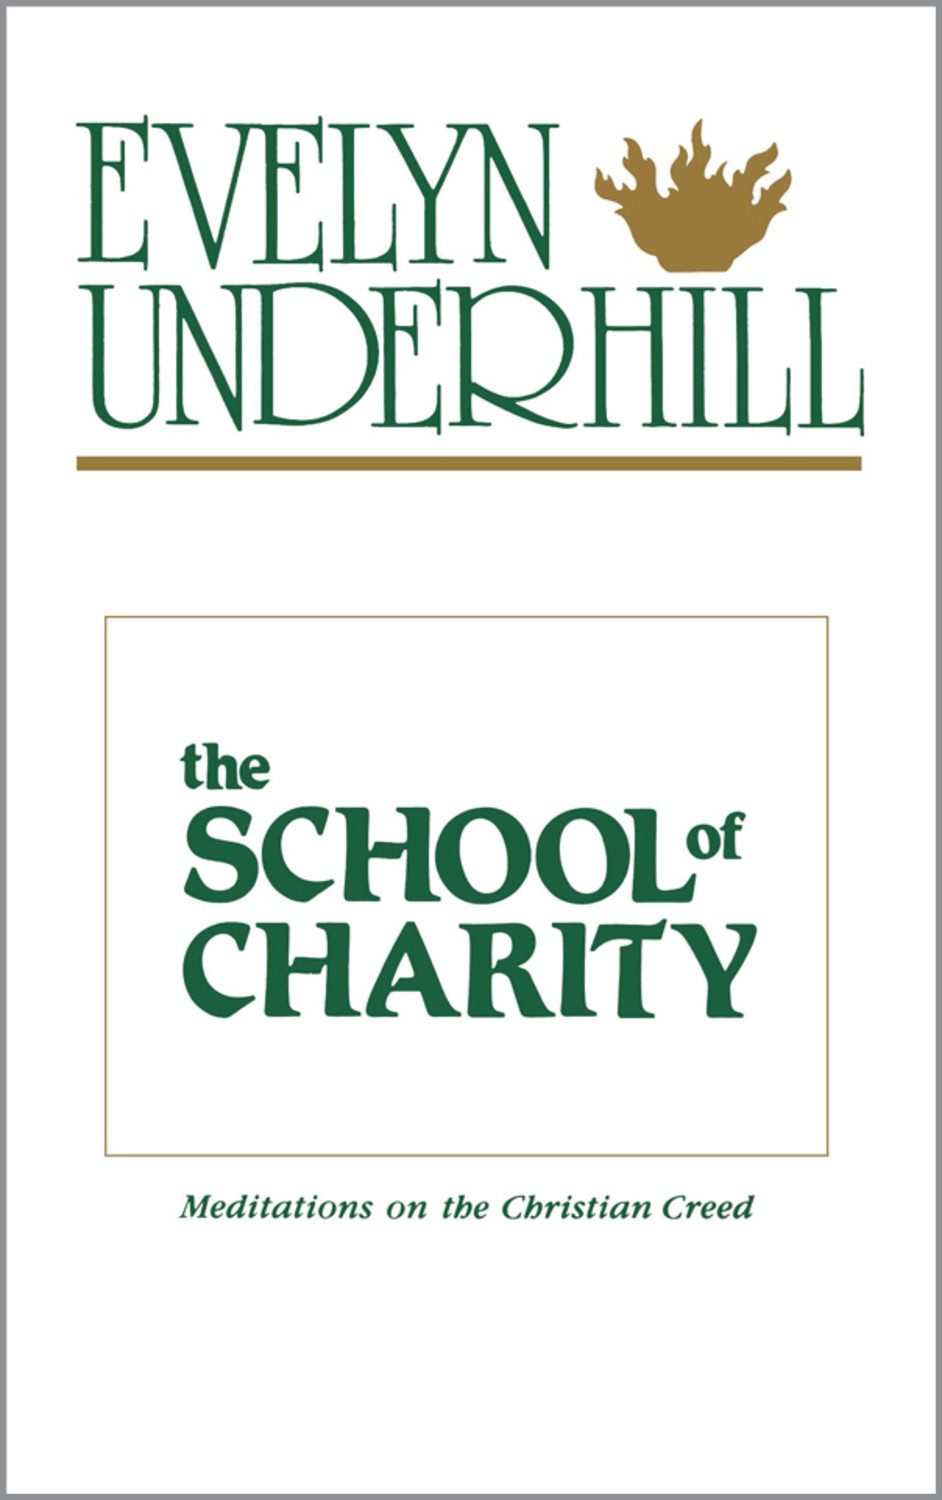 The School of Charity - Evelyn Underhill,,